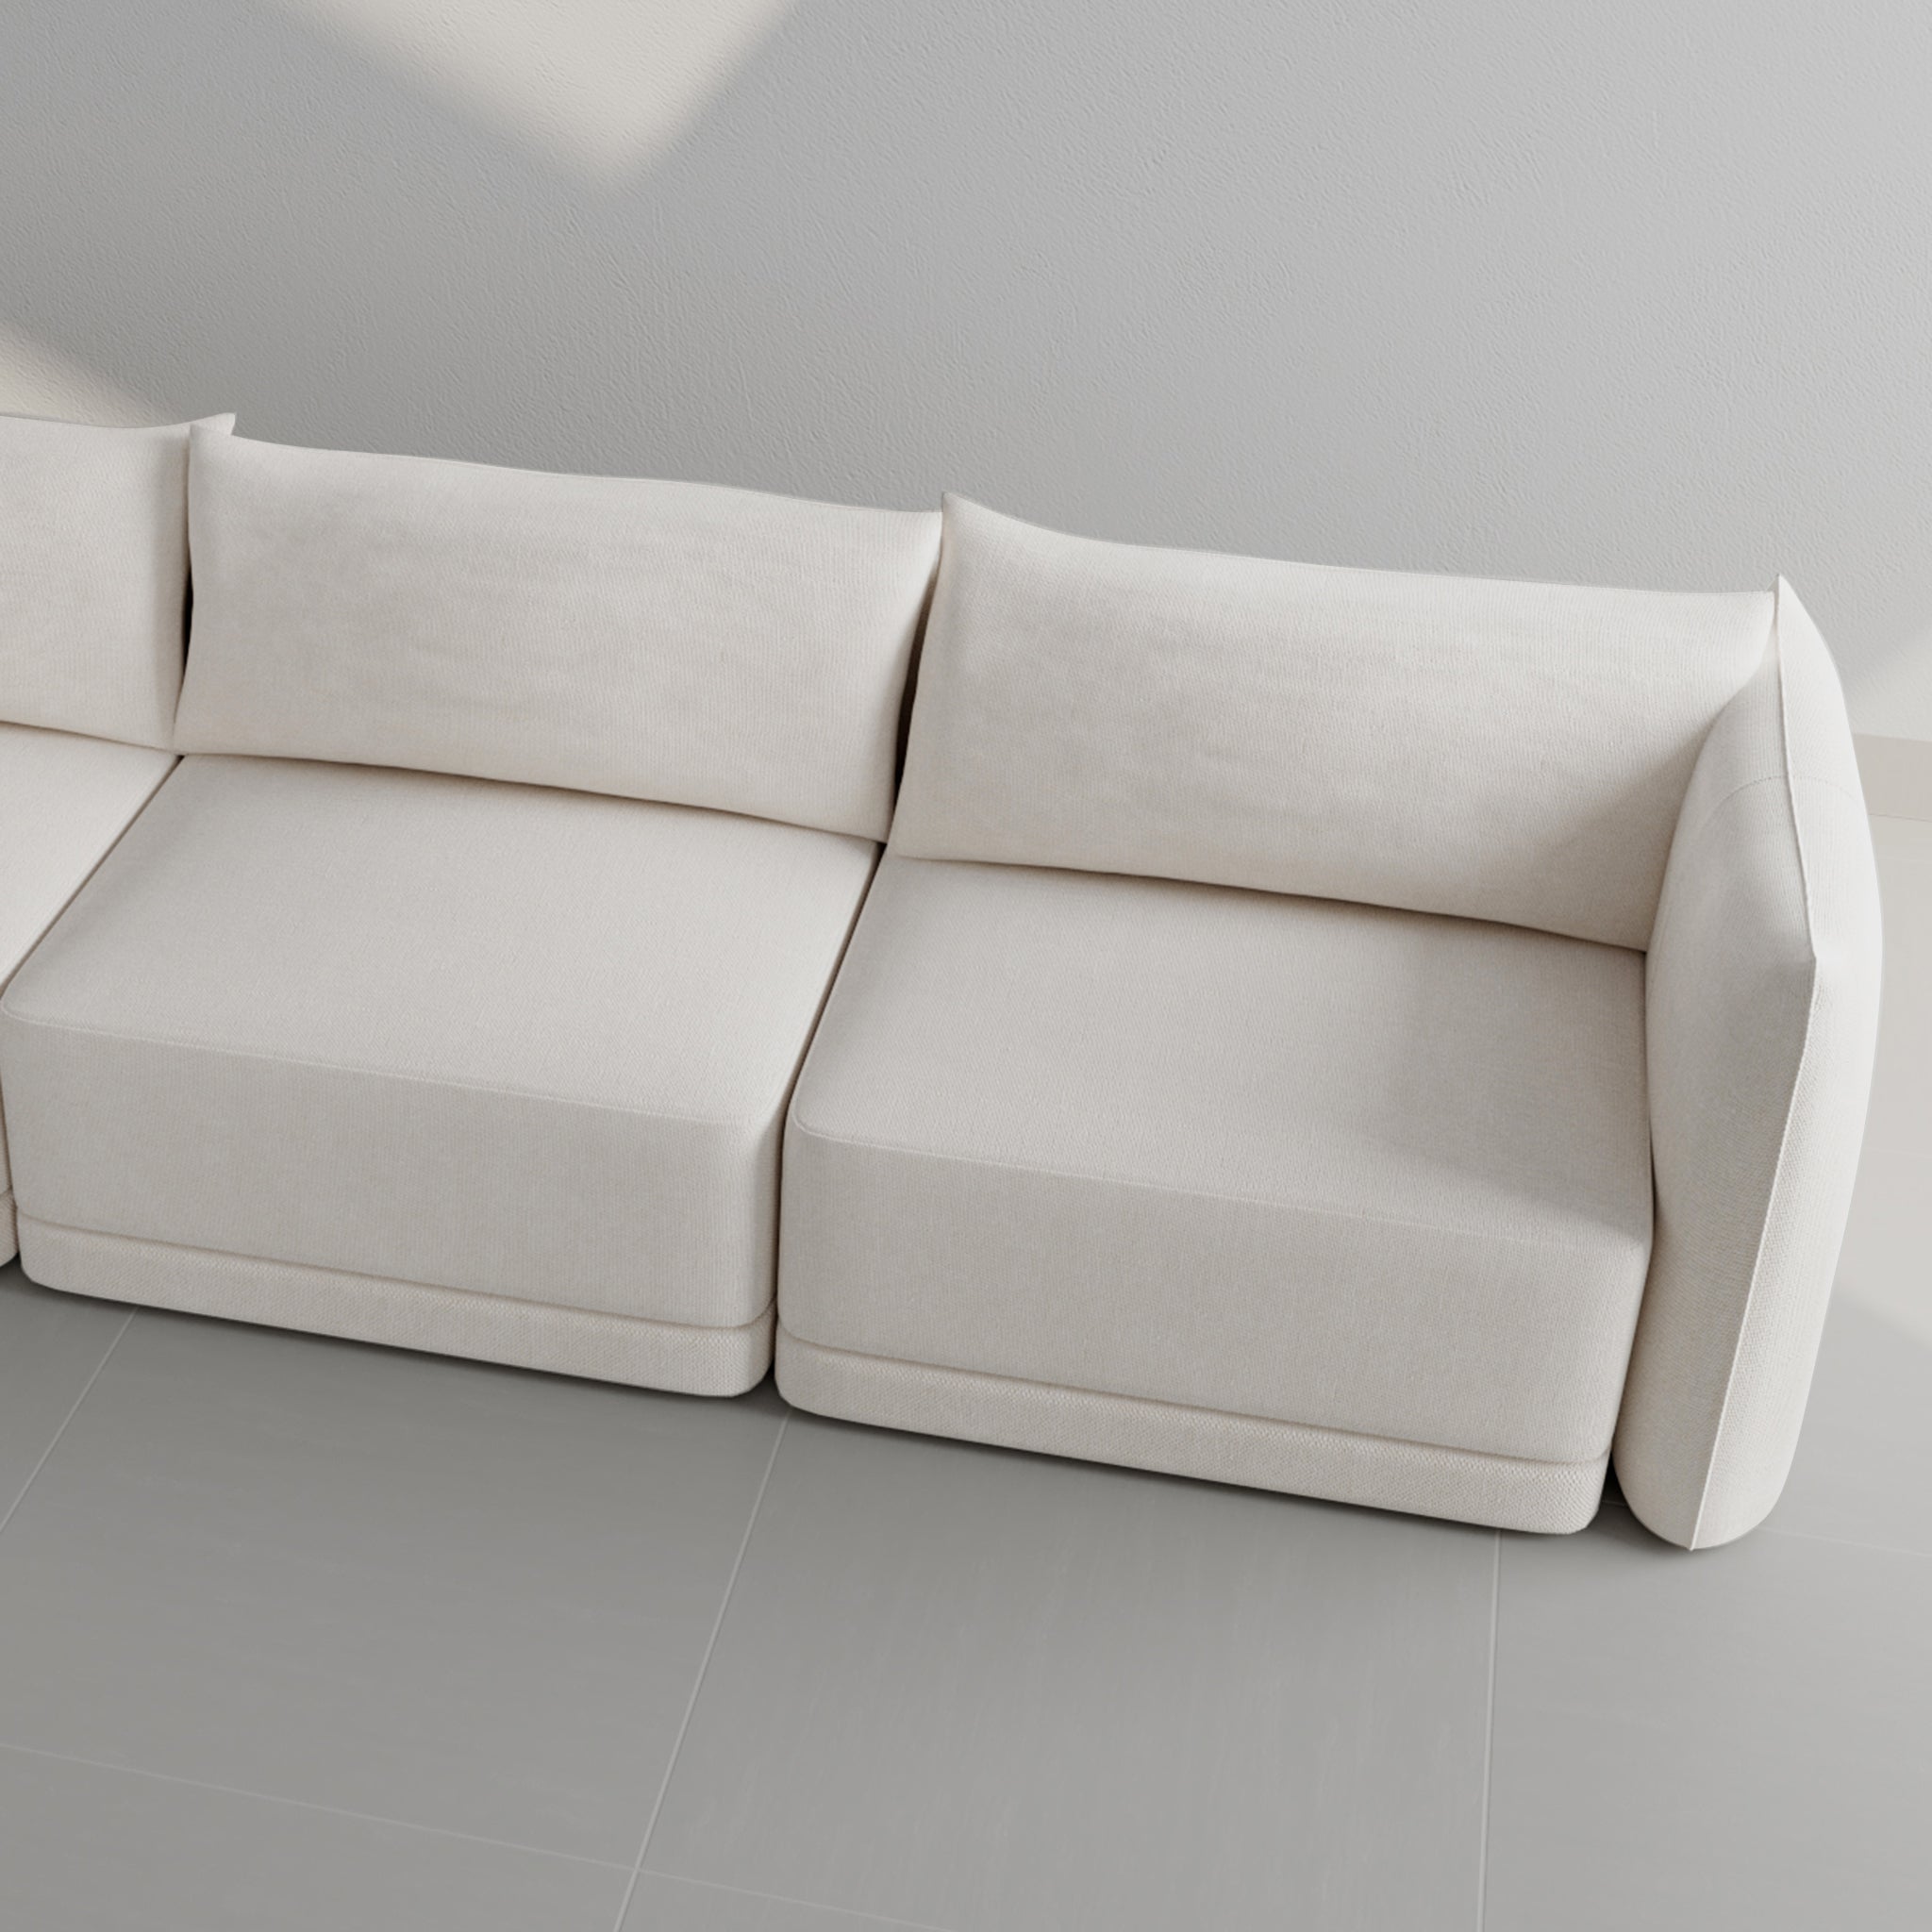 Top view of a modern white sectional sofa placed against a gray tiled floor, highlighting its spacious seating and contemporary design.